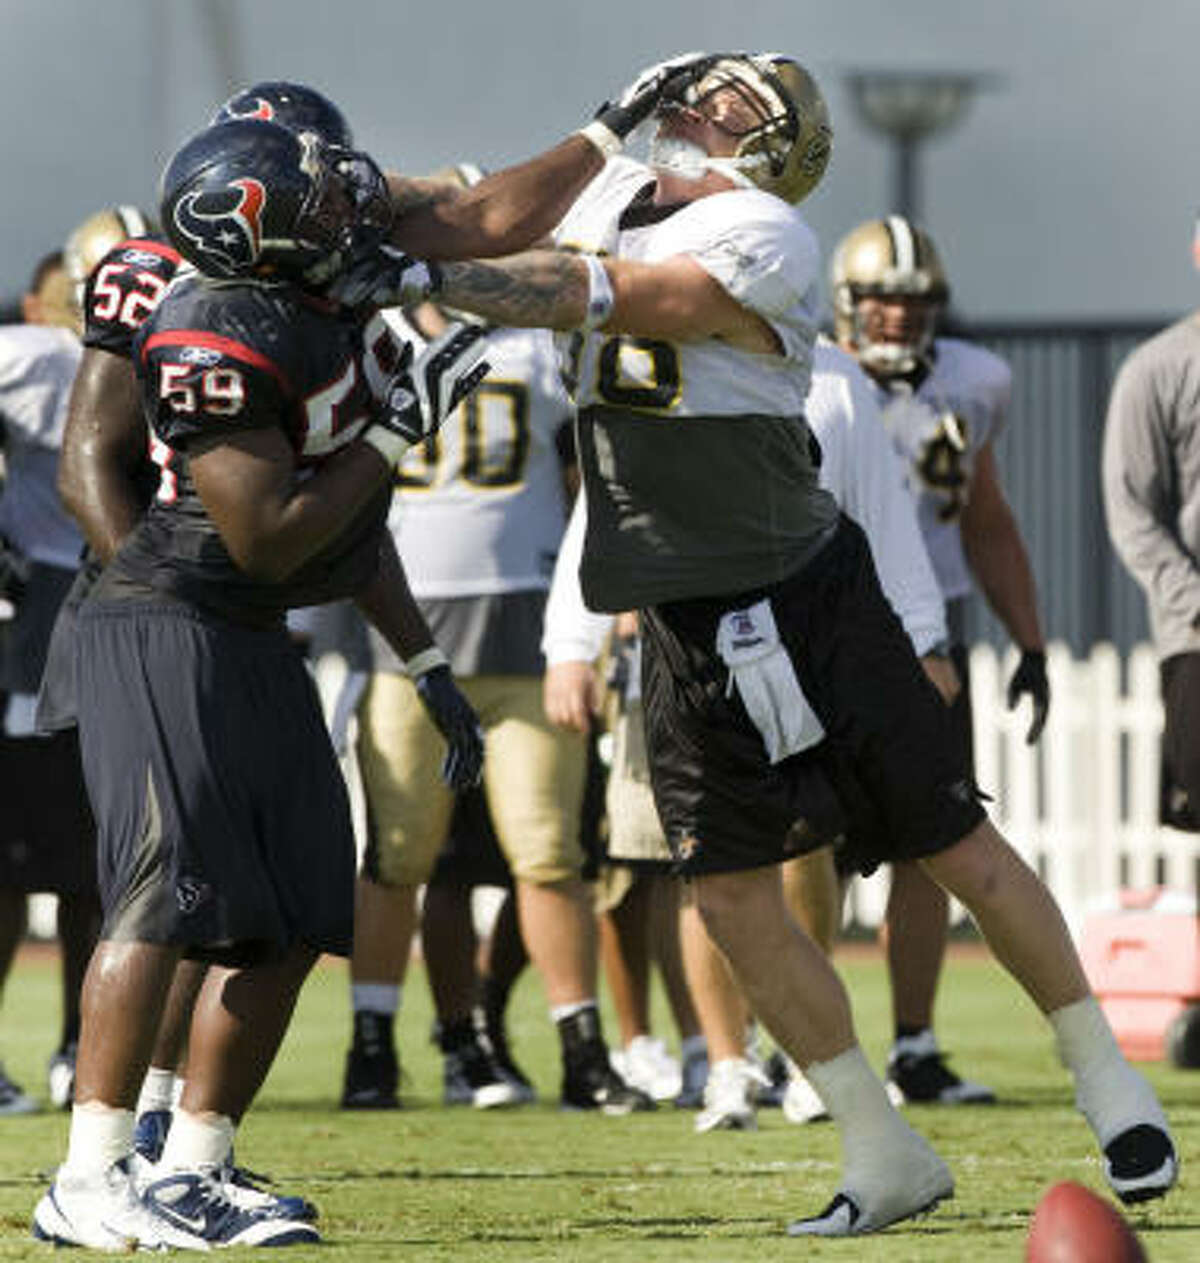 Texans linebacker DeMeco Ryans and New Orleans Saints tight end Jeremy Shockey get into a fight during Thursday's morning workout.